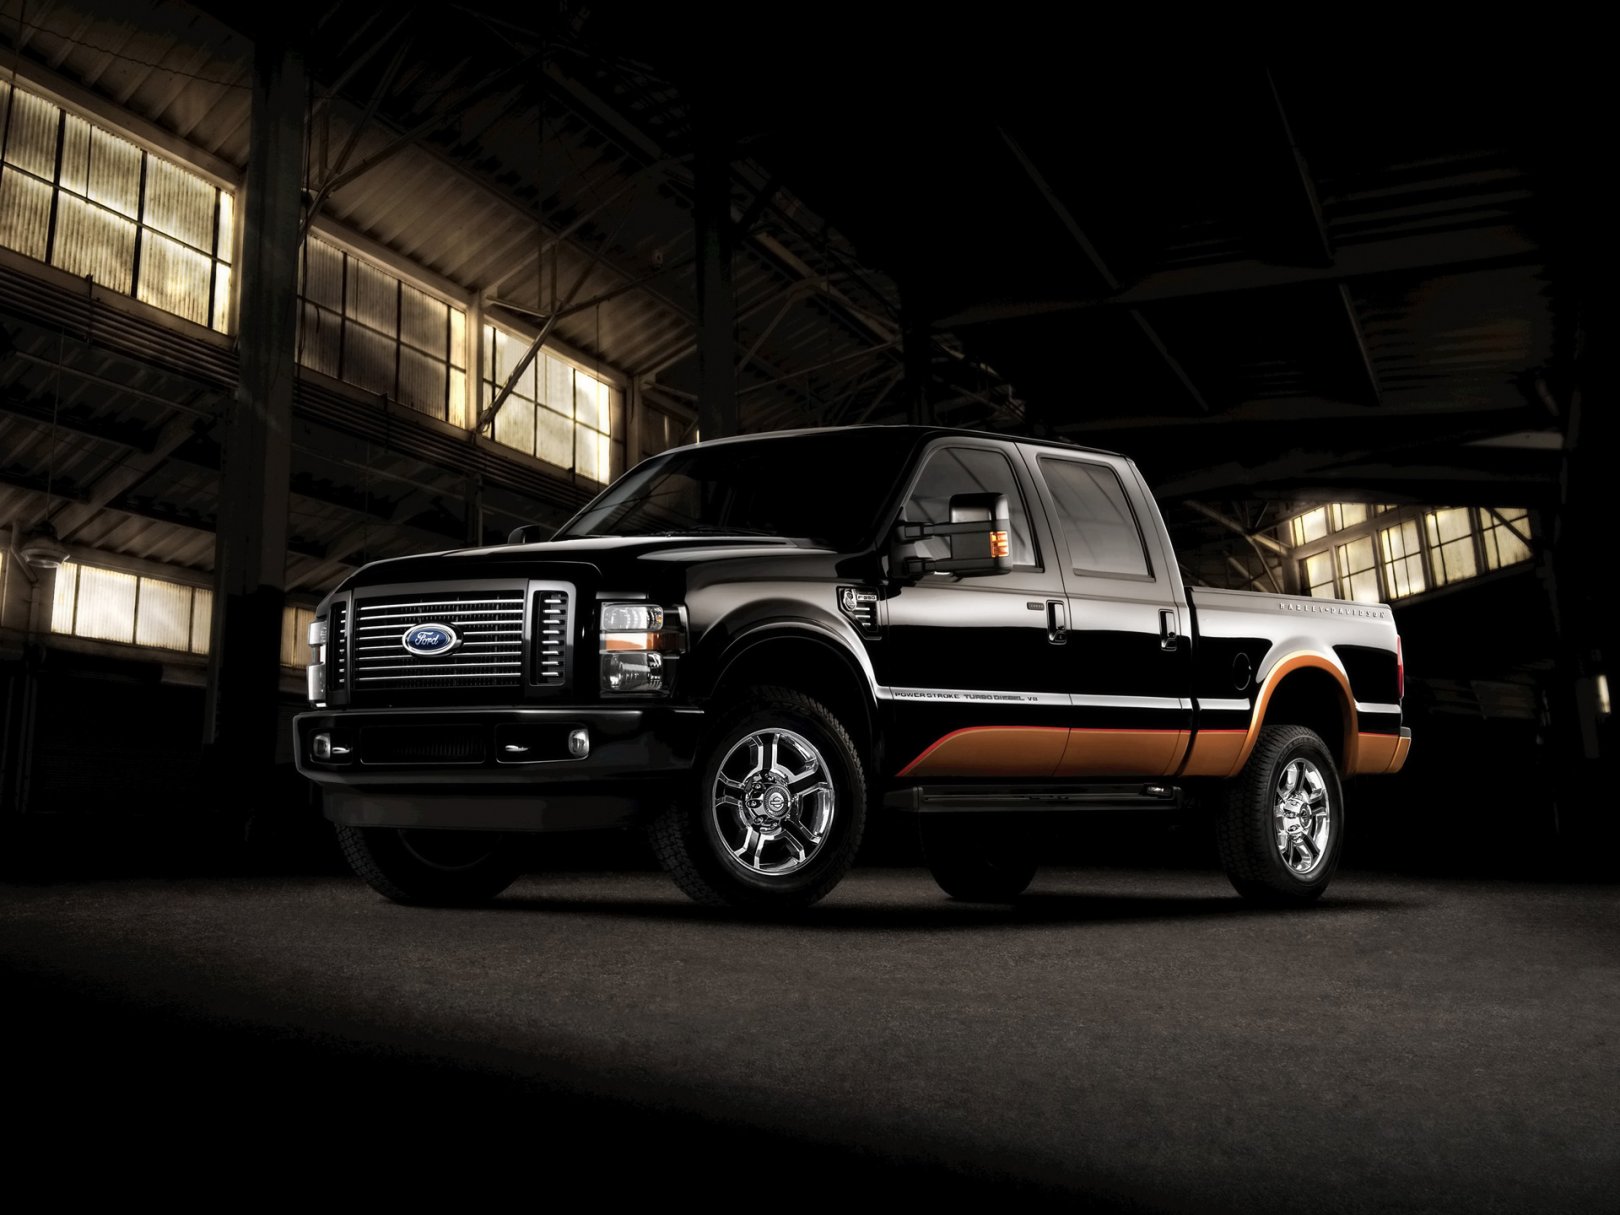 Foto: Ford Harley Davidson F Series Super Duty Front And Side (2008)